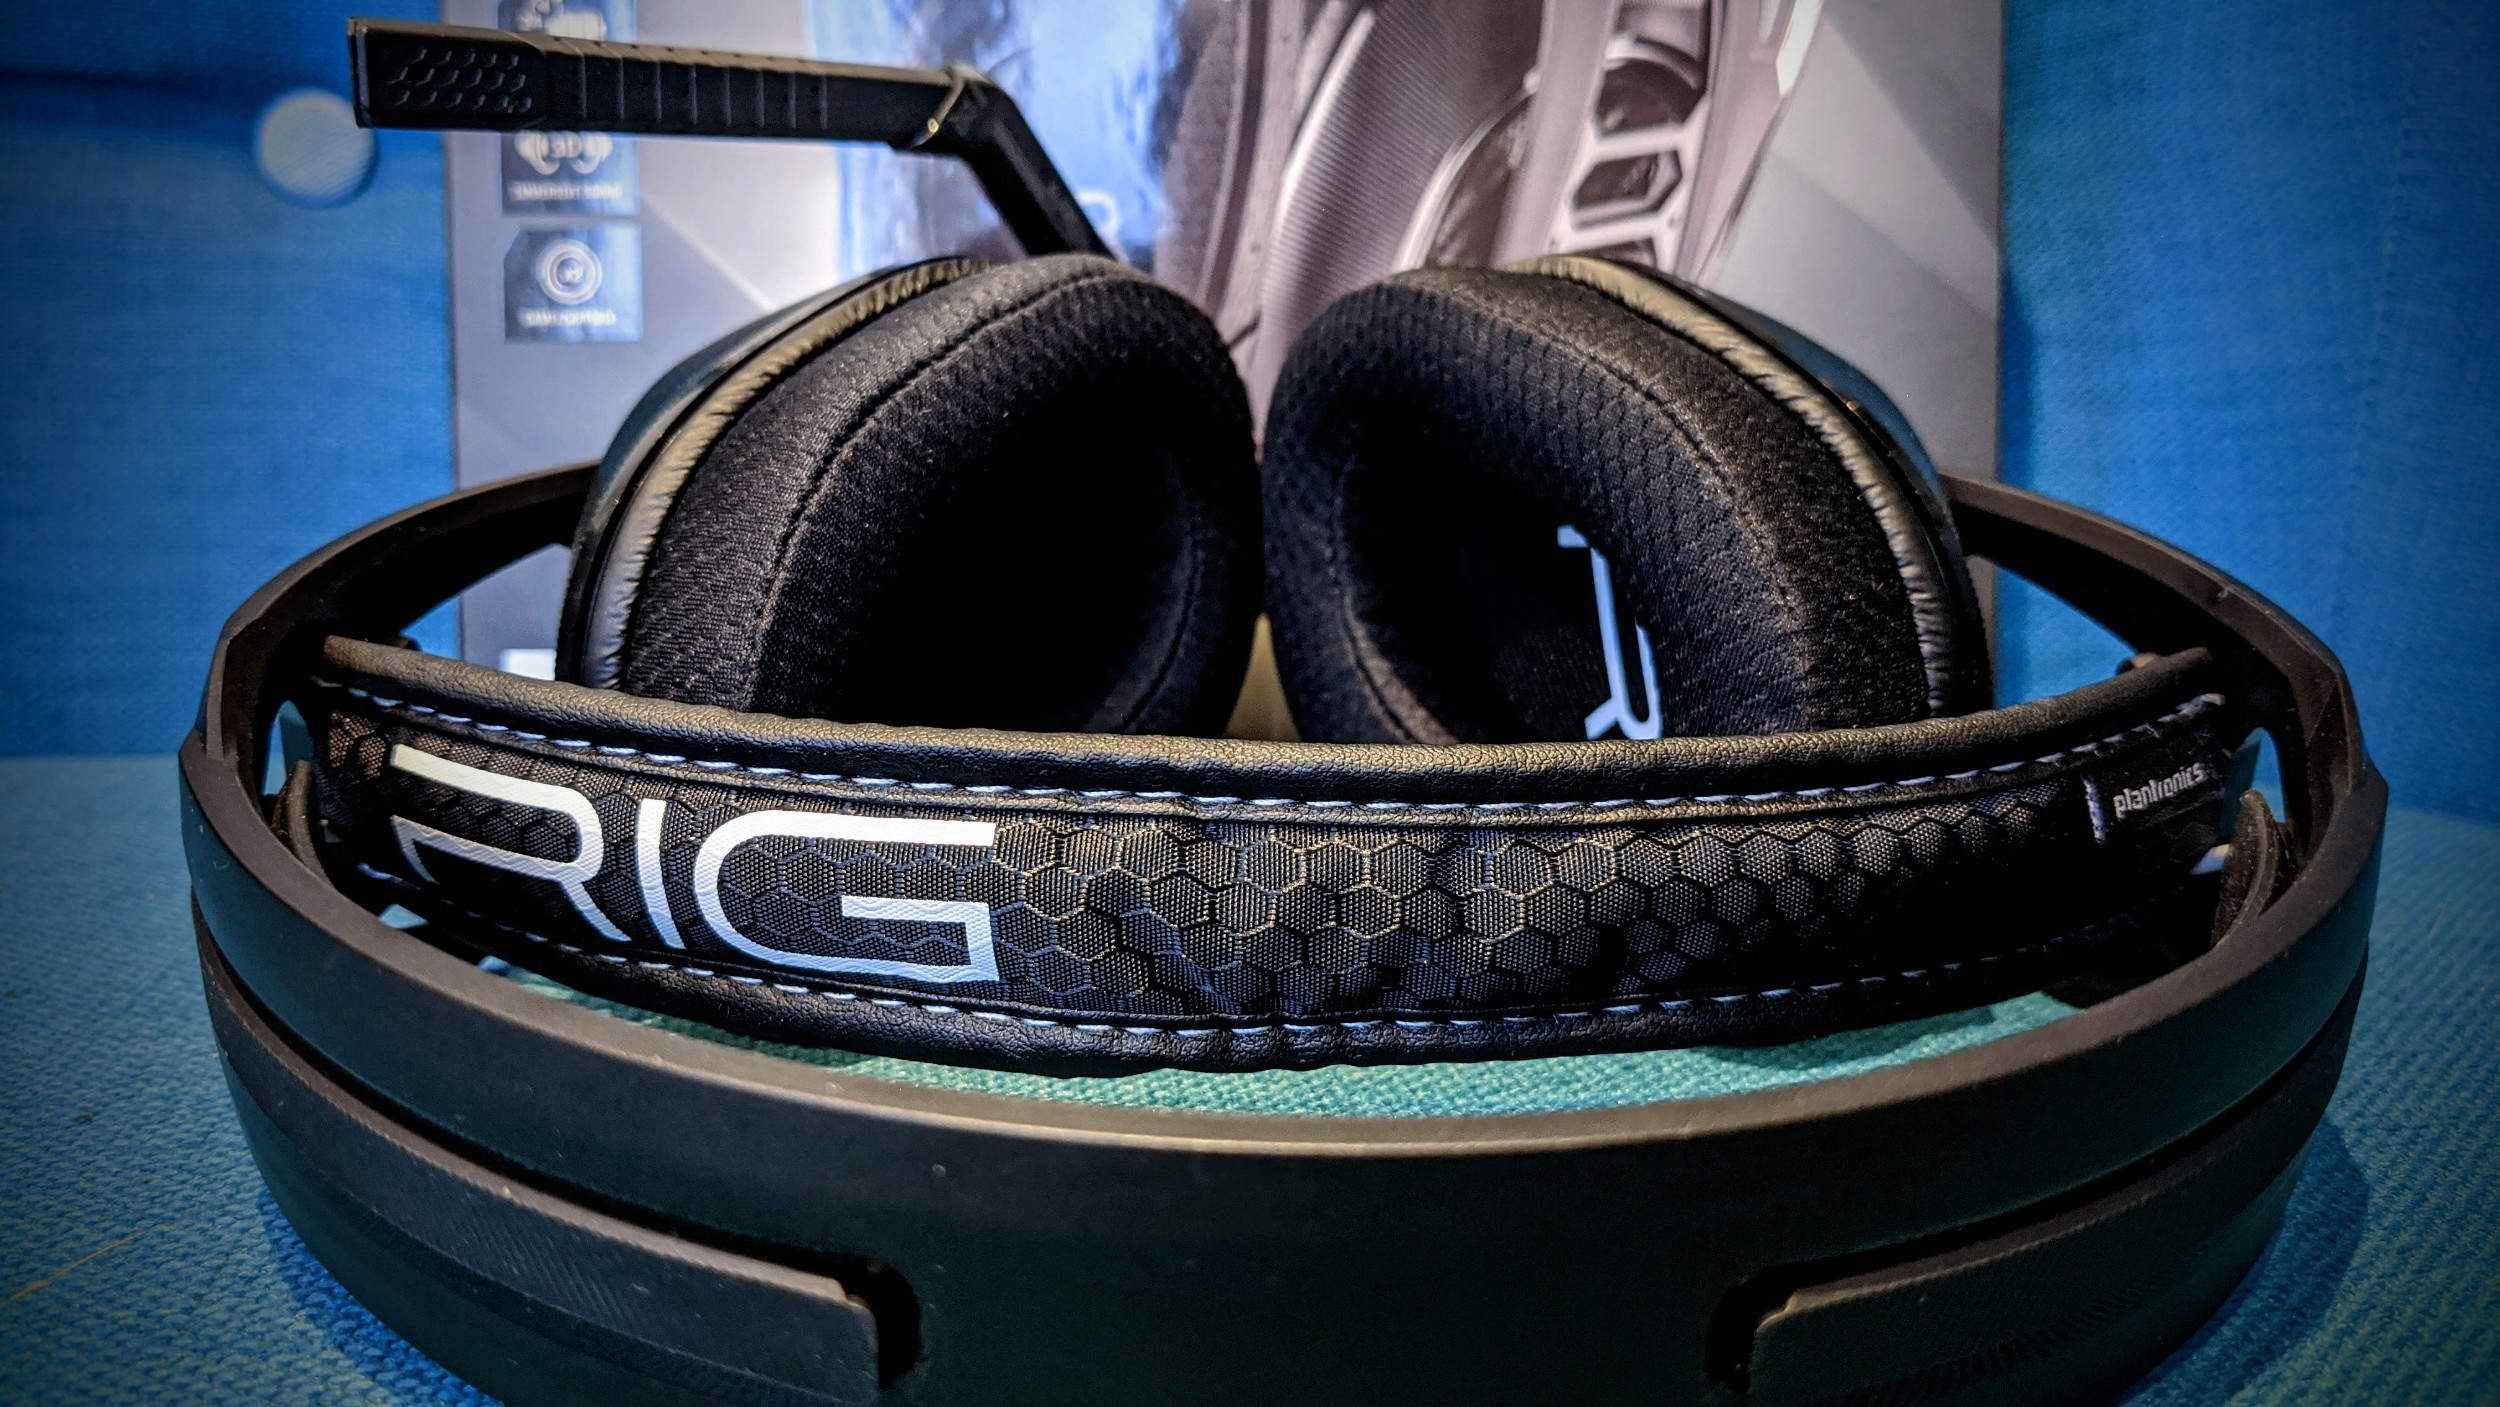 RIG 800LX Dolby Atmos Edition Headset Xbox Review | TheXboxHub